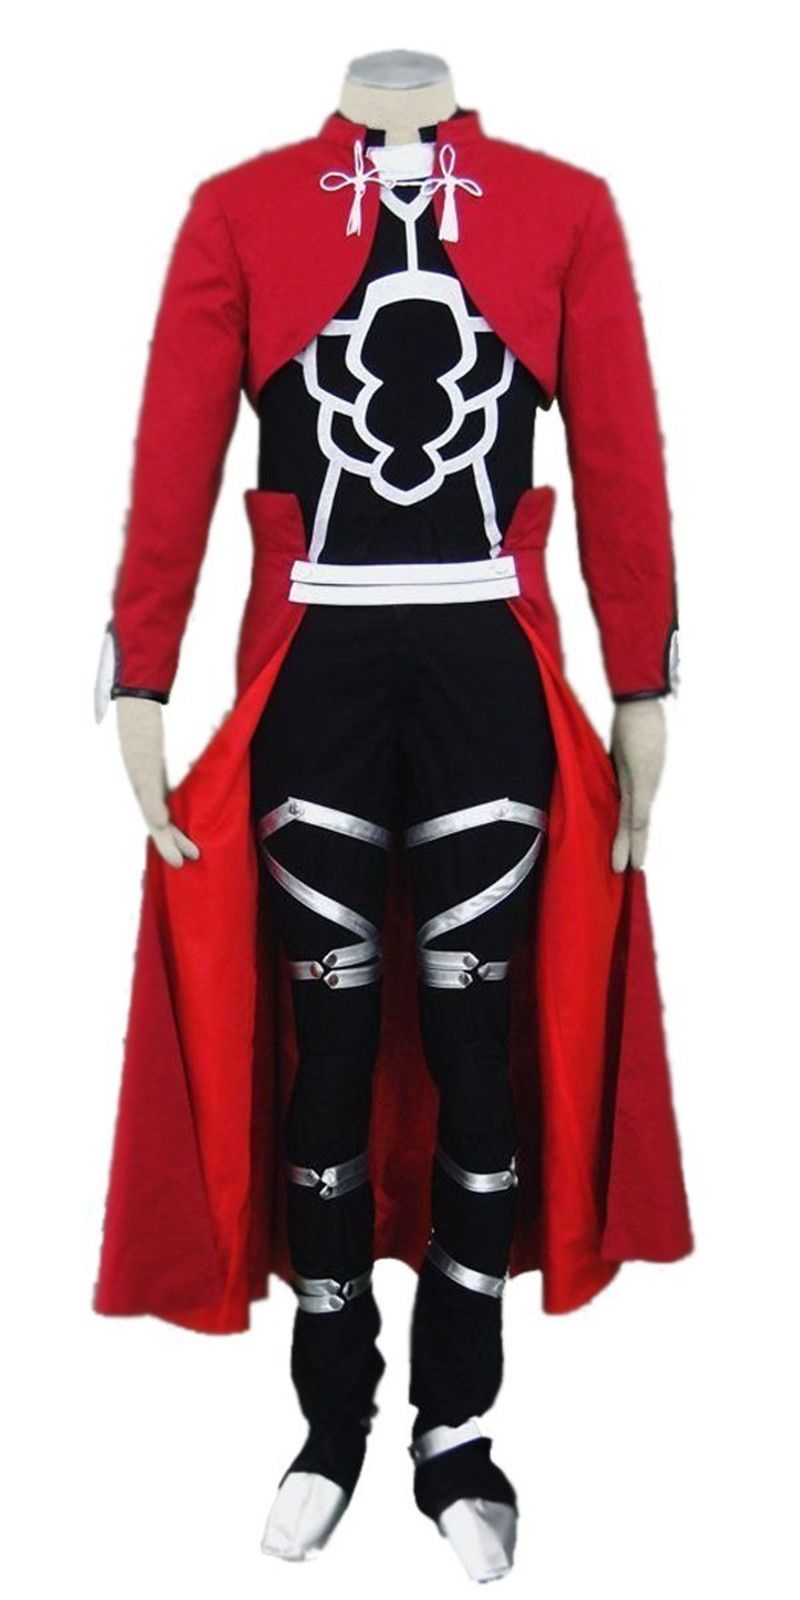 Malidaike Anime Fate Stay Night Archer Outfit 1st Cosplay Costume Unifrom Male Size Punisher Cosplay Costume Cosplay Wig Site From Malidaike 101 52 Dhgate Com